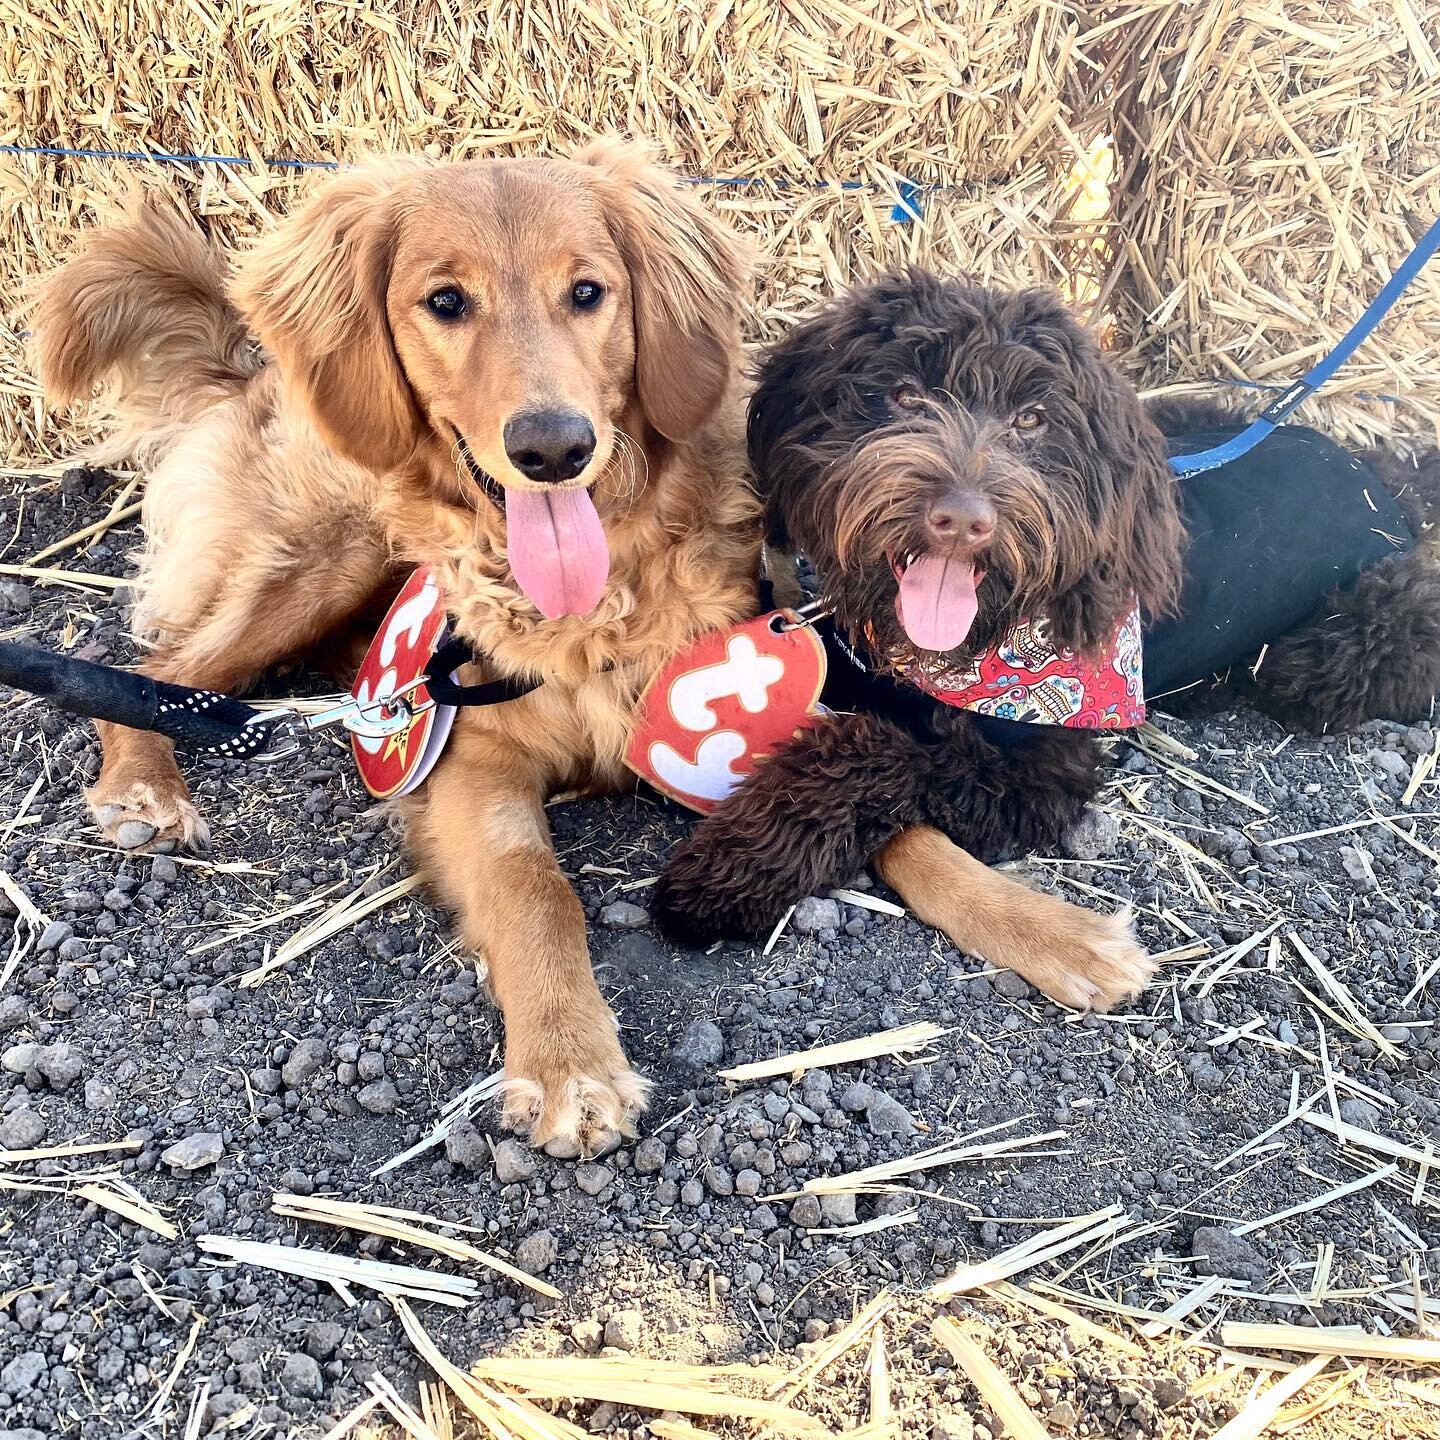 Happy Halloween from these two @goldenstatedoodles pups!! Be safe out there and make sure your fur babies don&rsquo;t get ahold of any candy!! 🍫🍬#happyhalloween @annieshibley_wellness @boden.the.doubledoodle